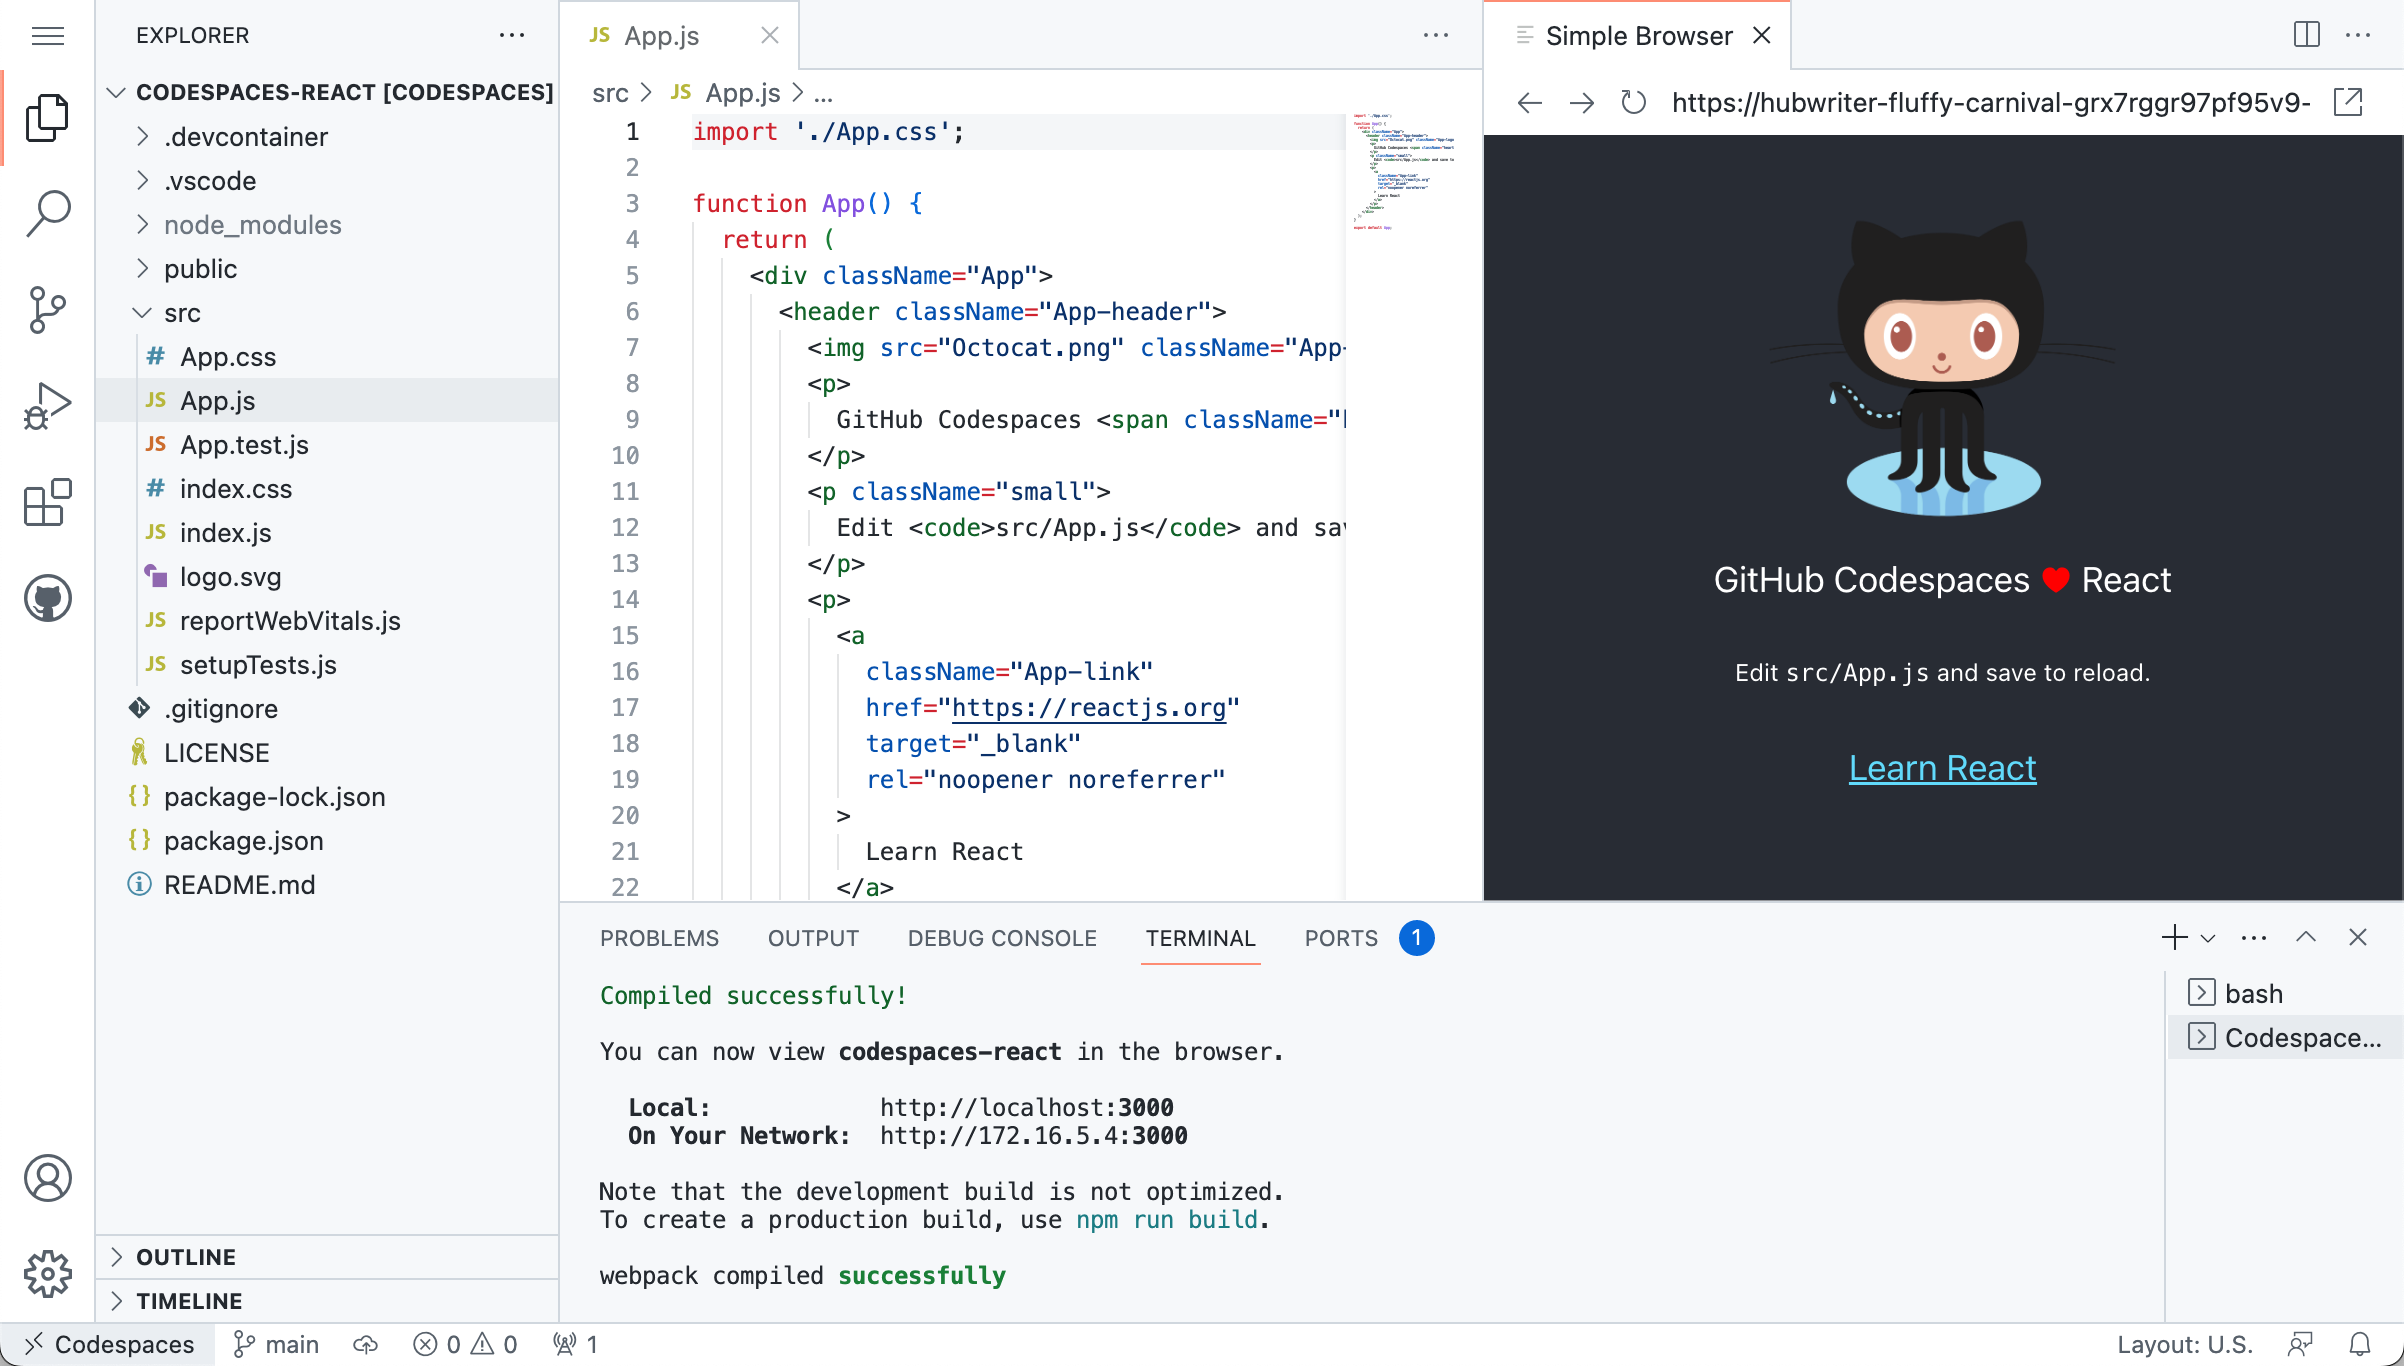 Screenshot of VS Code's simple browser rendering the web application in GitHub's React template.